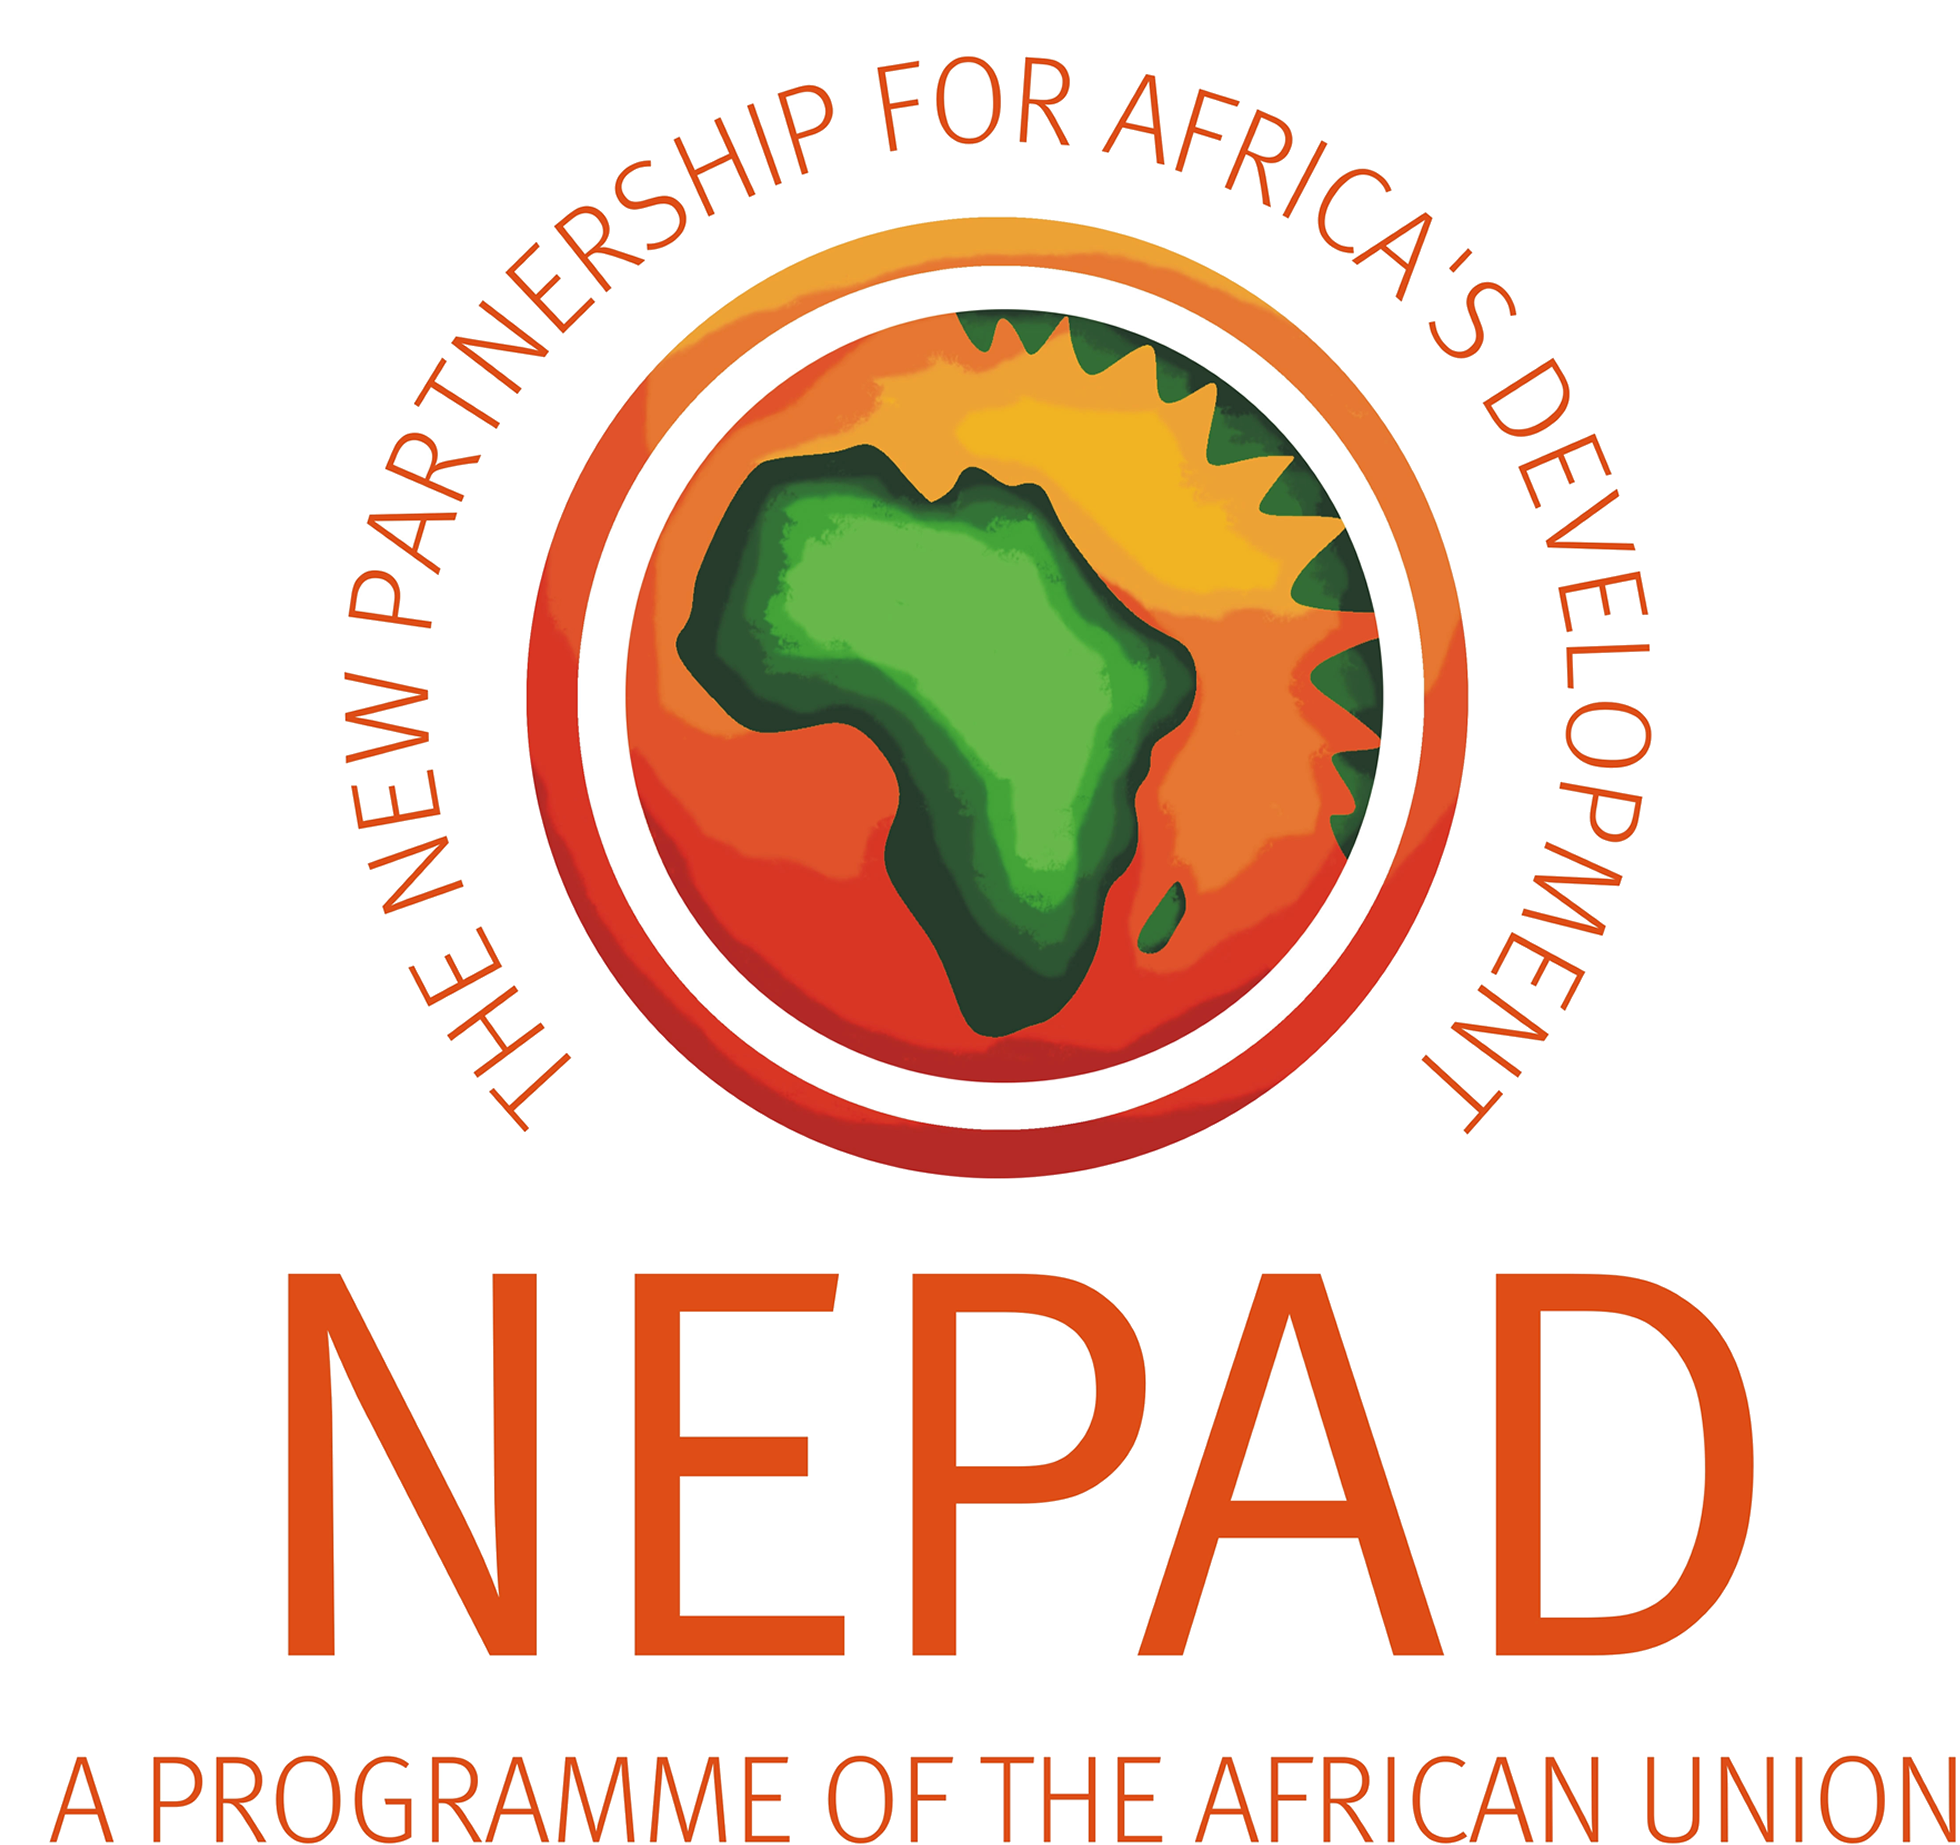 New Partnership for Africa’s Development (NEPAD) and Africa.com Join Forces to support African Small Businesses